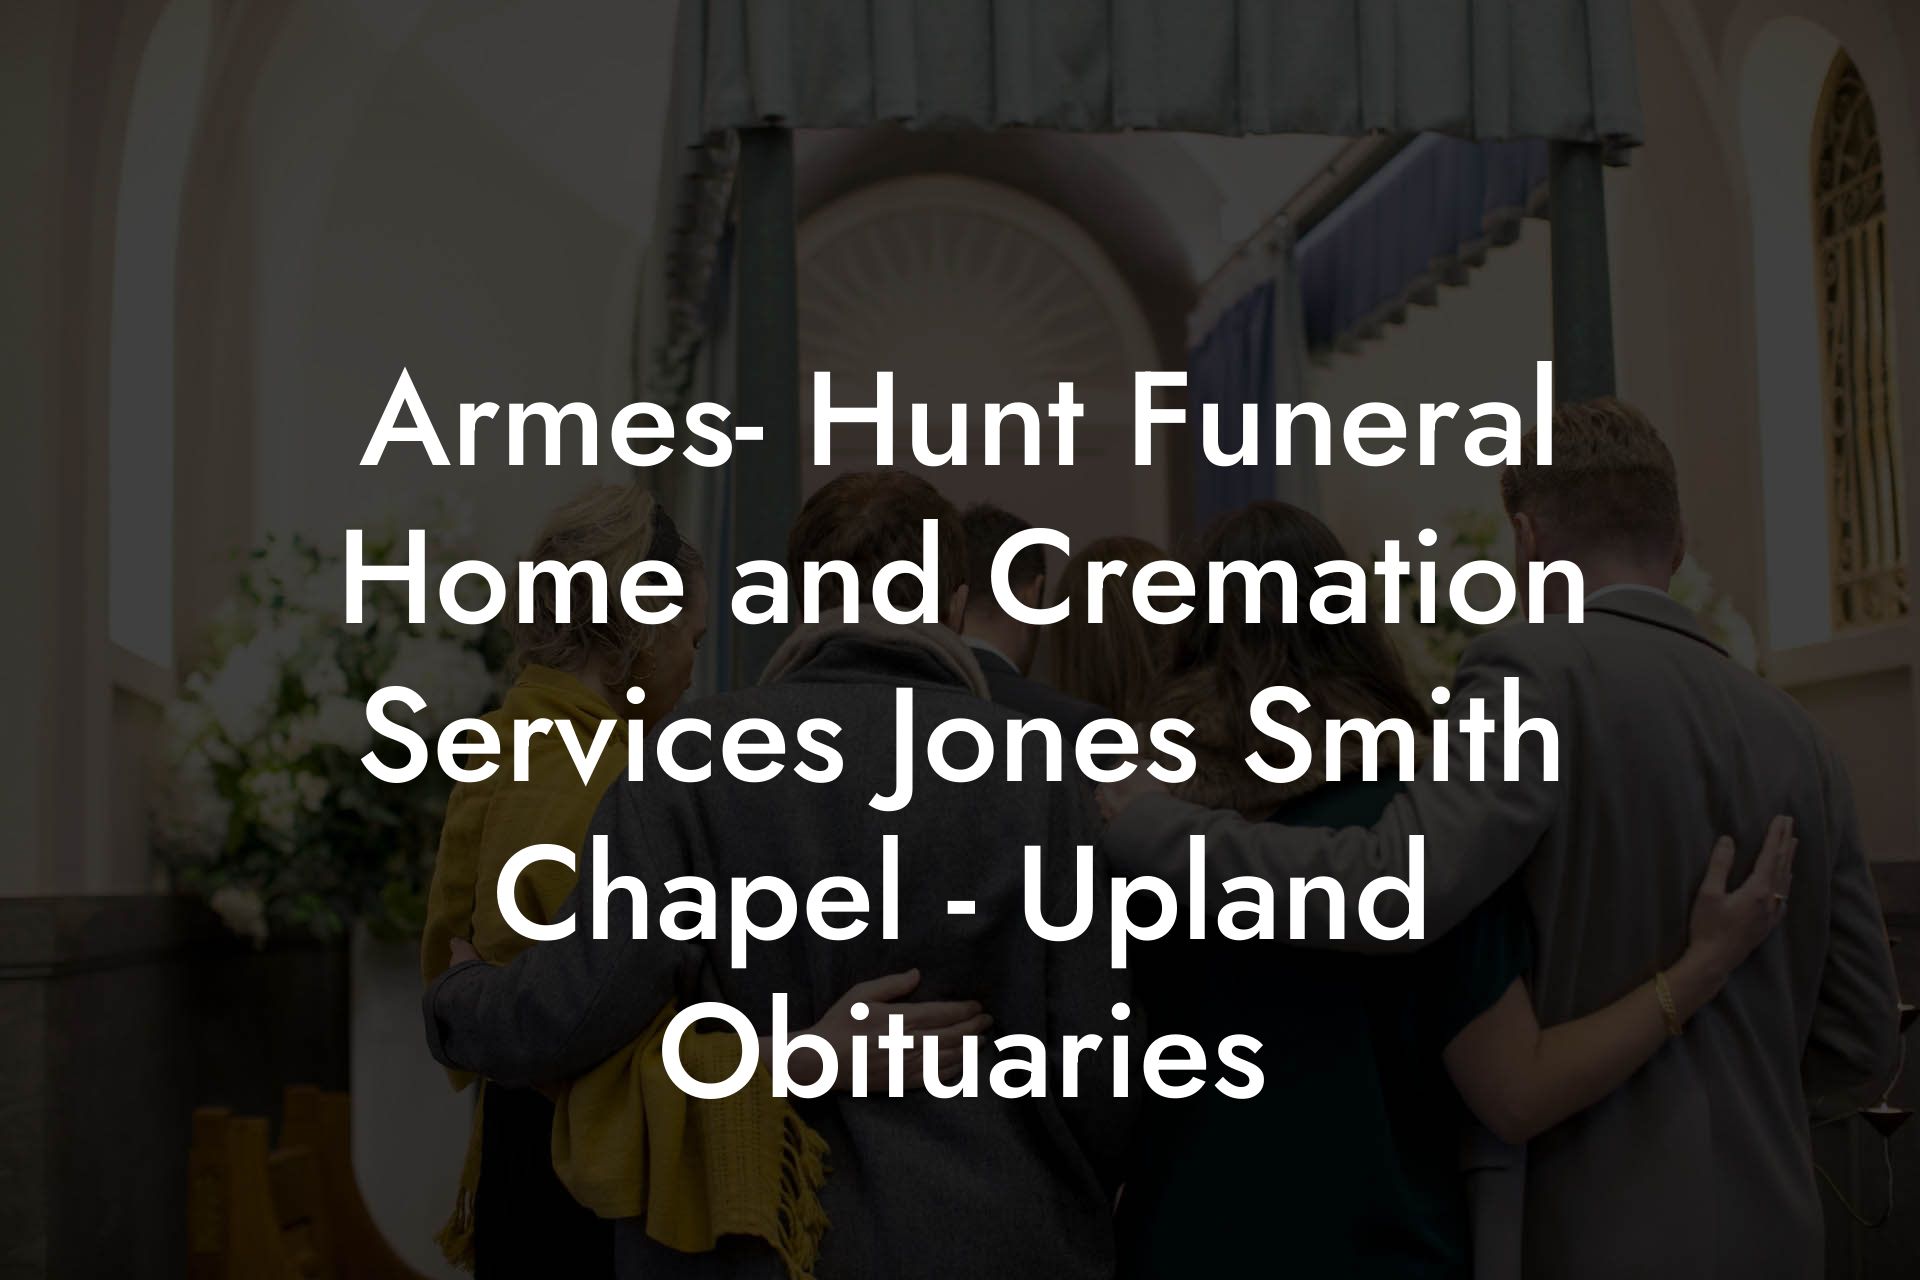 Armes- Hunt Funeral Home and Cremation Services Jones Smith Chapel - Upland Obituaries